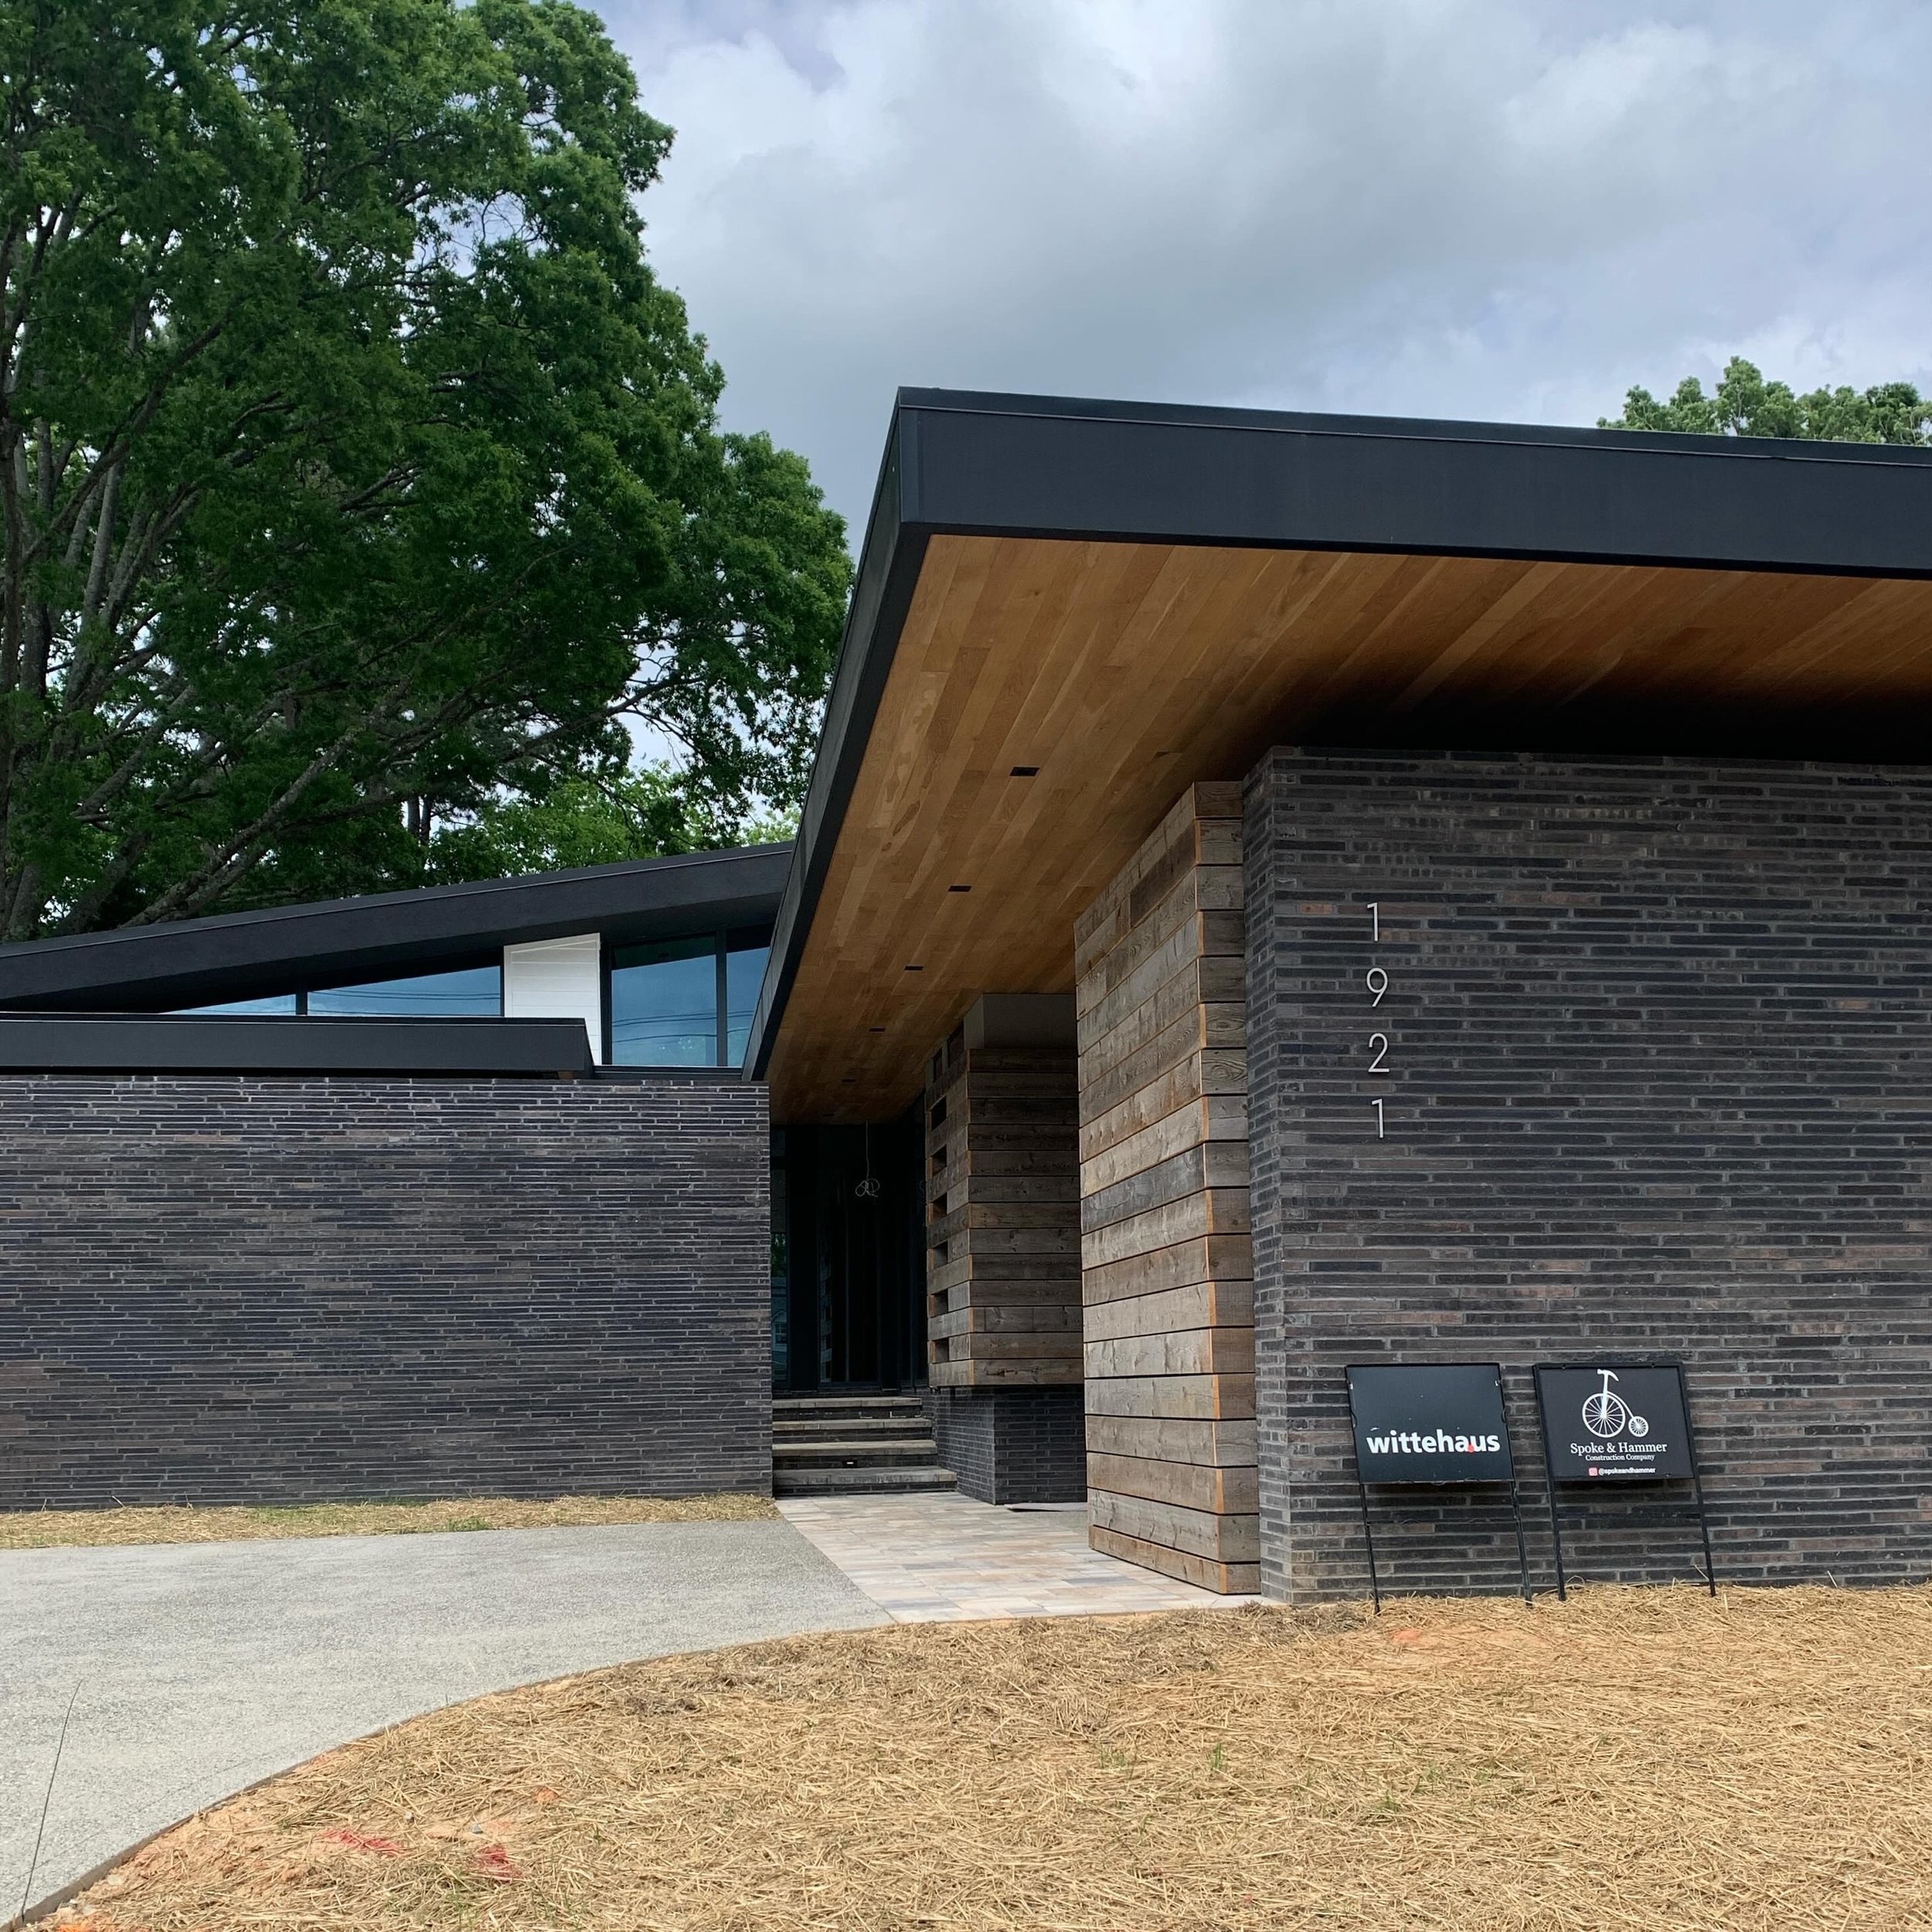 House Built. Homeowners Unpacked. Bliss Aplenty. Next up: making the landscaping pop with Landscape Architect Ric Solow.
..
slideshow: #cohendavisresidence #plazamidwood #charlottehomes 
..
build: @spokeandhammer 
interiors and built-ins: @fine.grit 